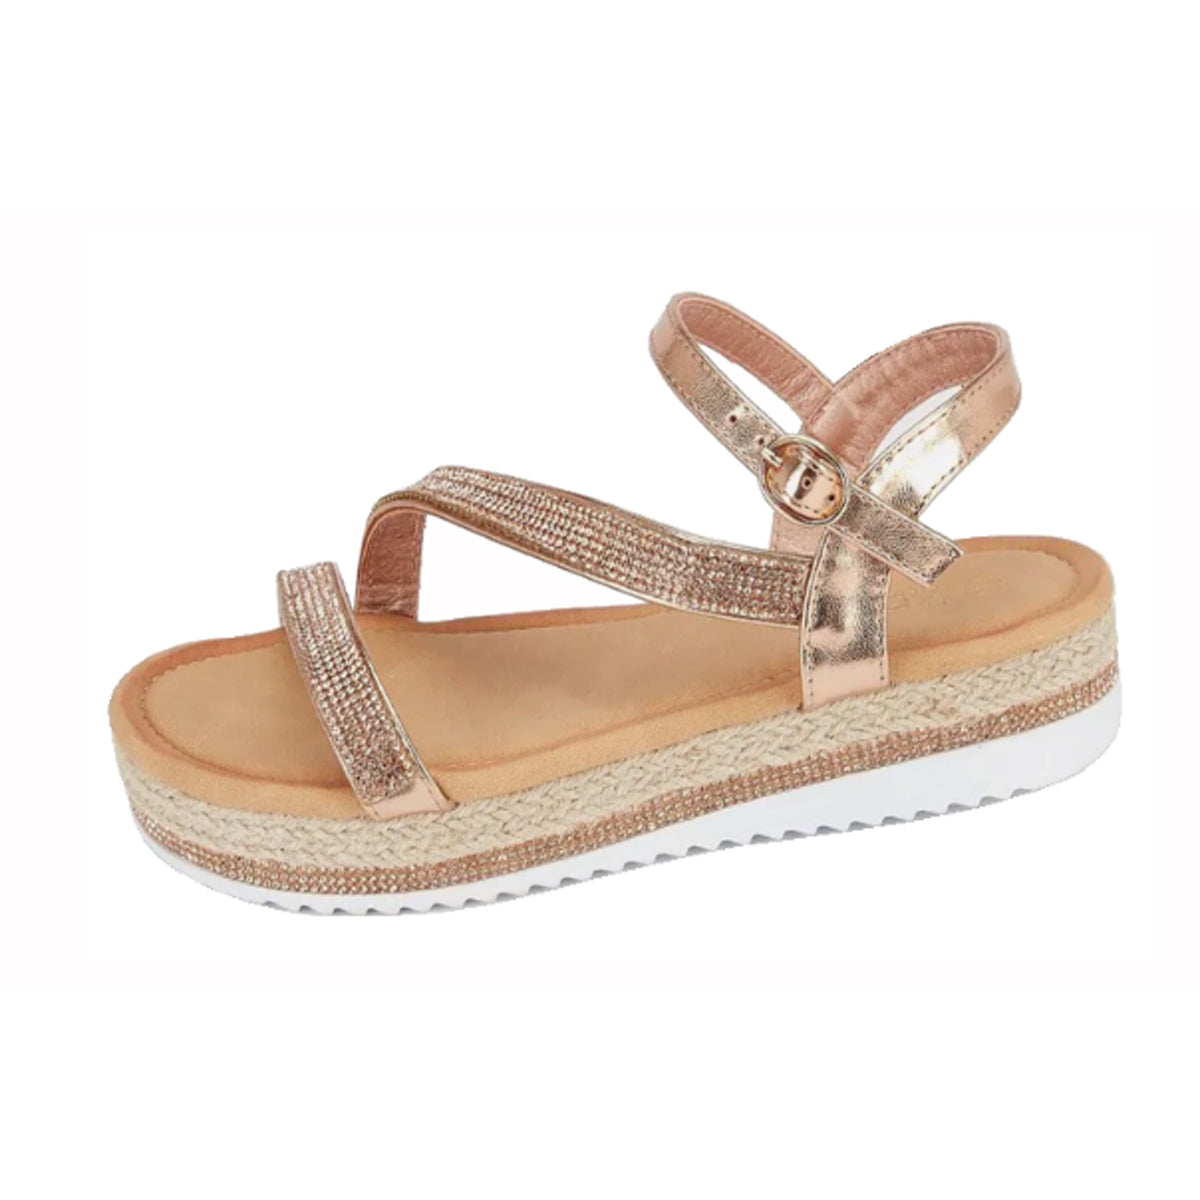 Sparkle effect low Wedge summer sandals